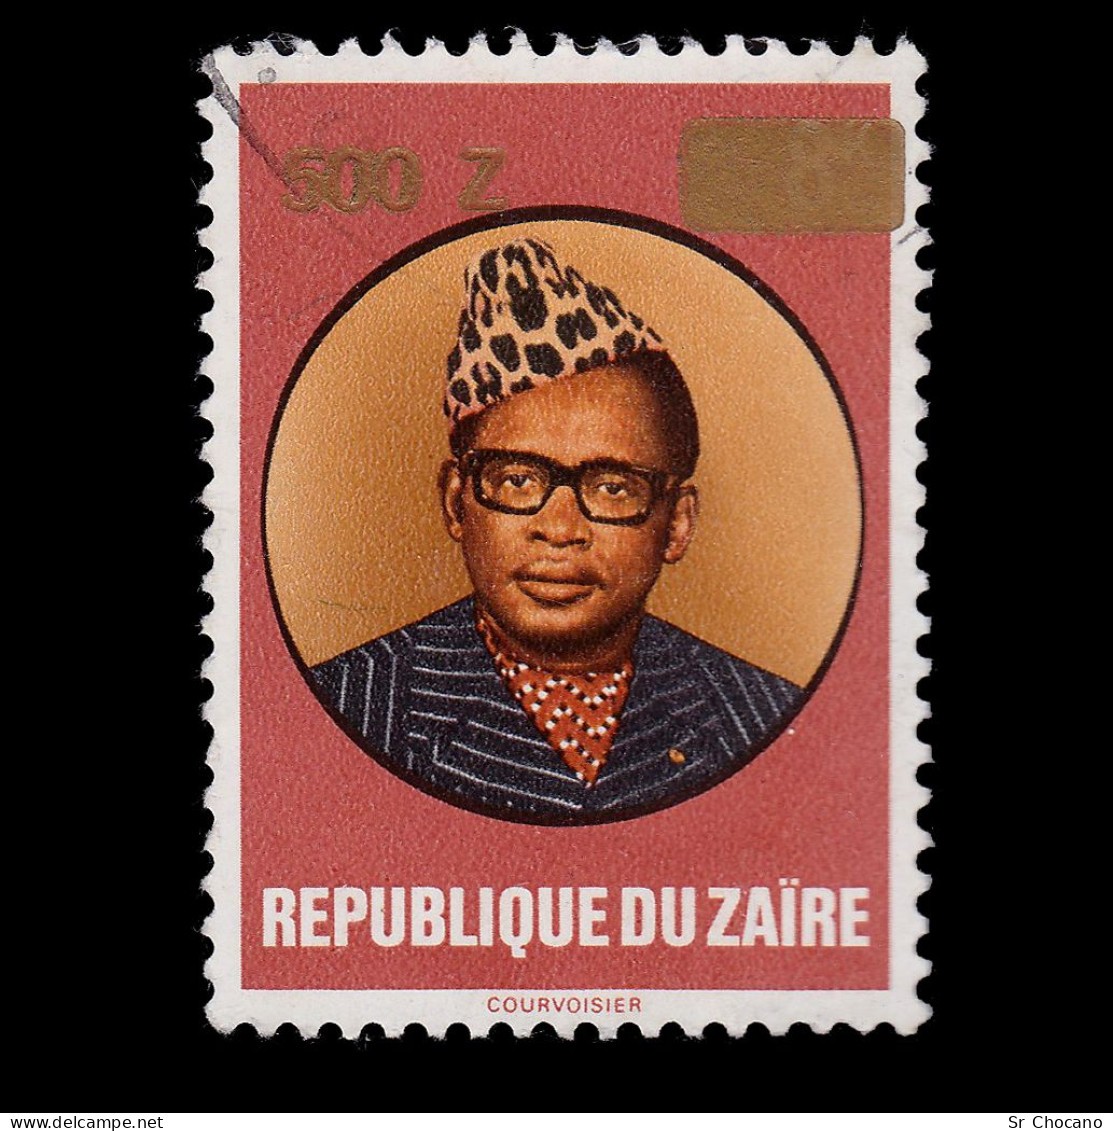 ZAIRE STAMP.1990.Mobutu.500z On 8k.SCOTT 1333.USED. - Used Stamps